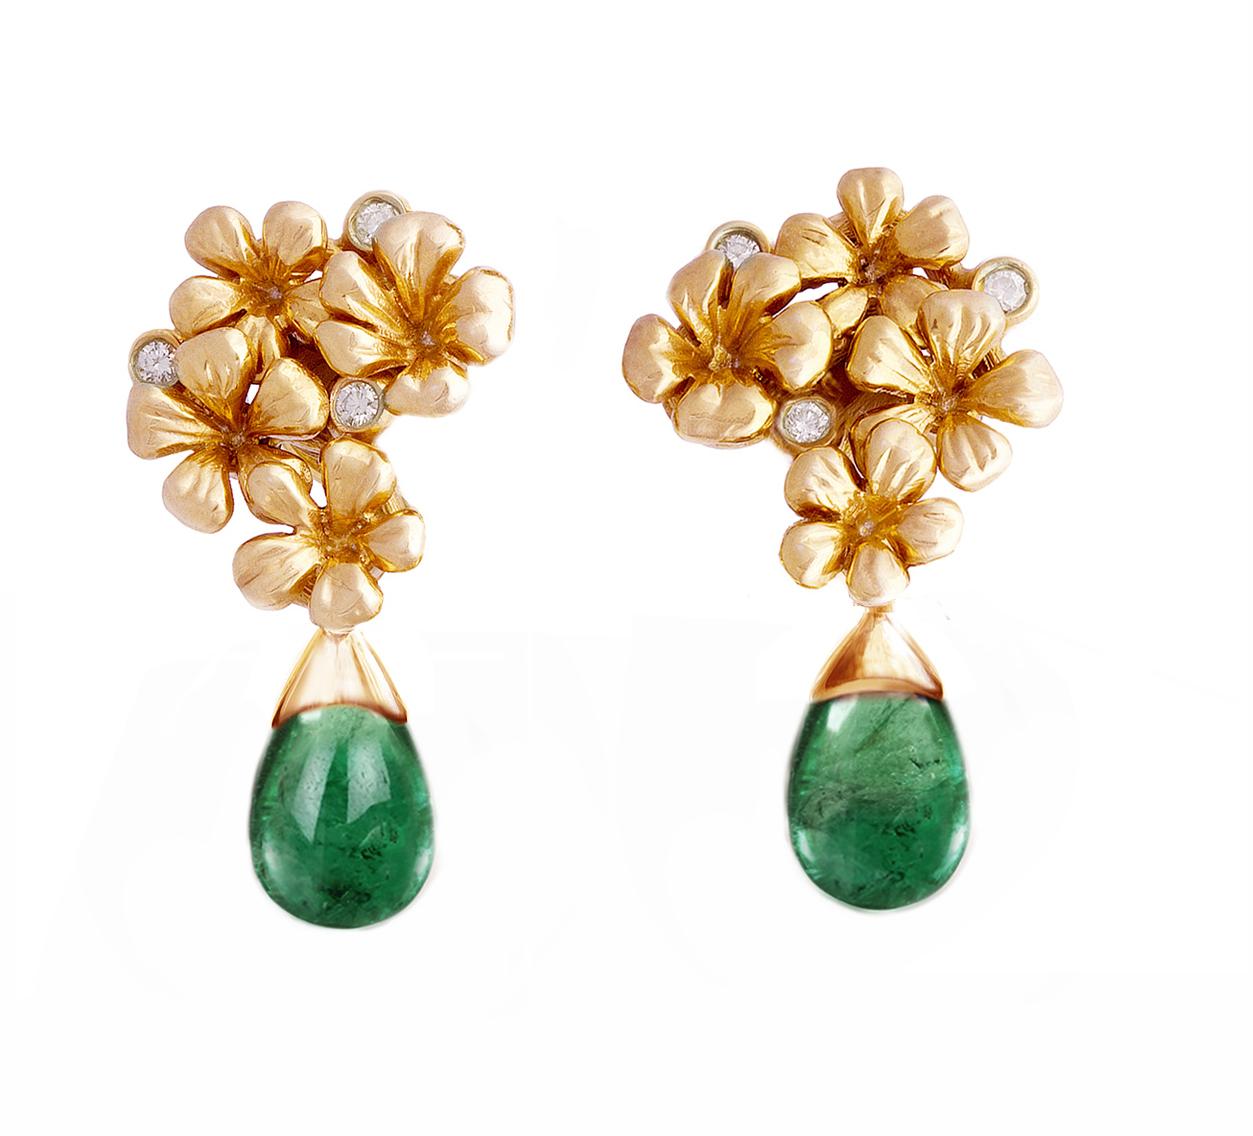 These earrings are made of 18 karat rose gold and feature 6 round diamonds and removable natural cabochon emeralds. The drops can be taken on or off, allowing for versatile wear with or without the gemstones.

The sculptural design of the earrings